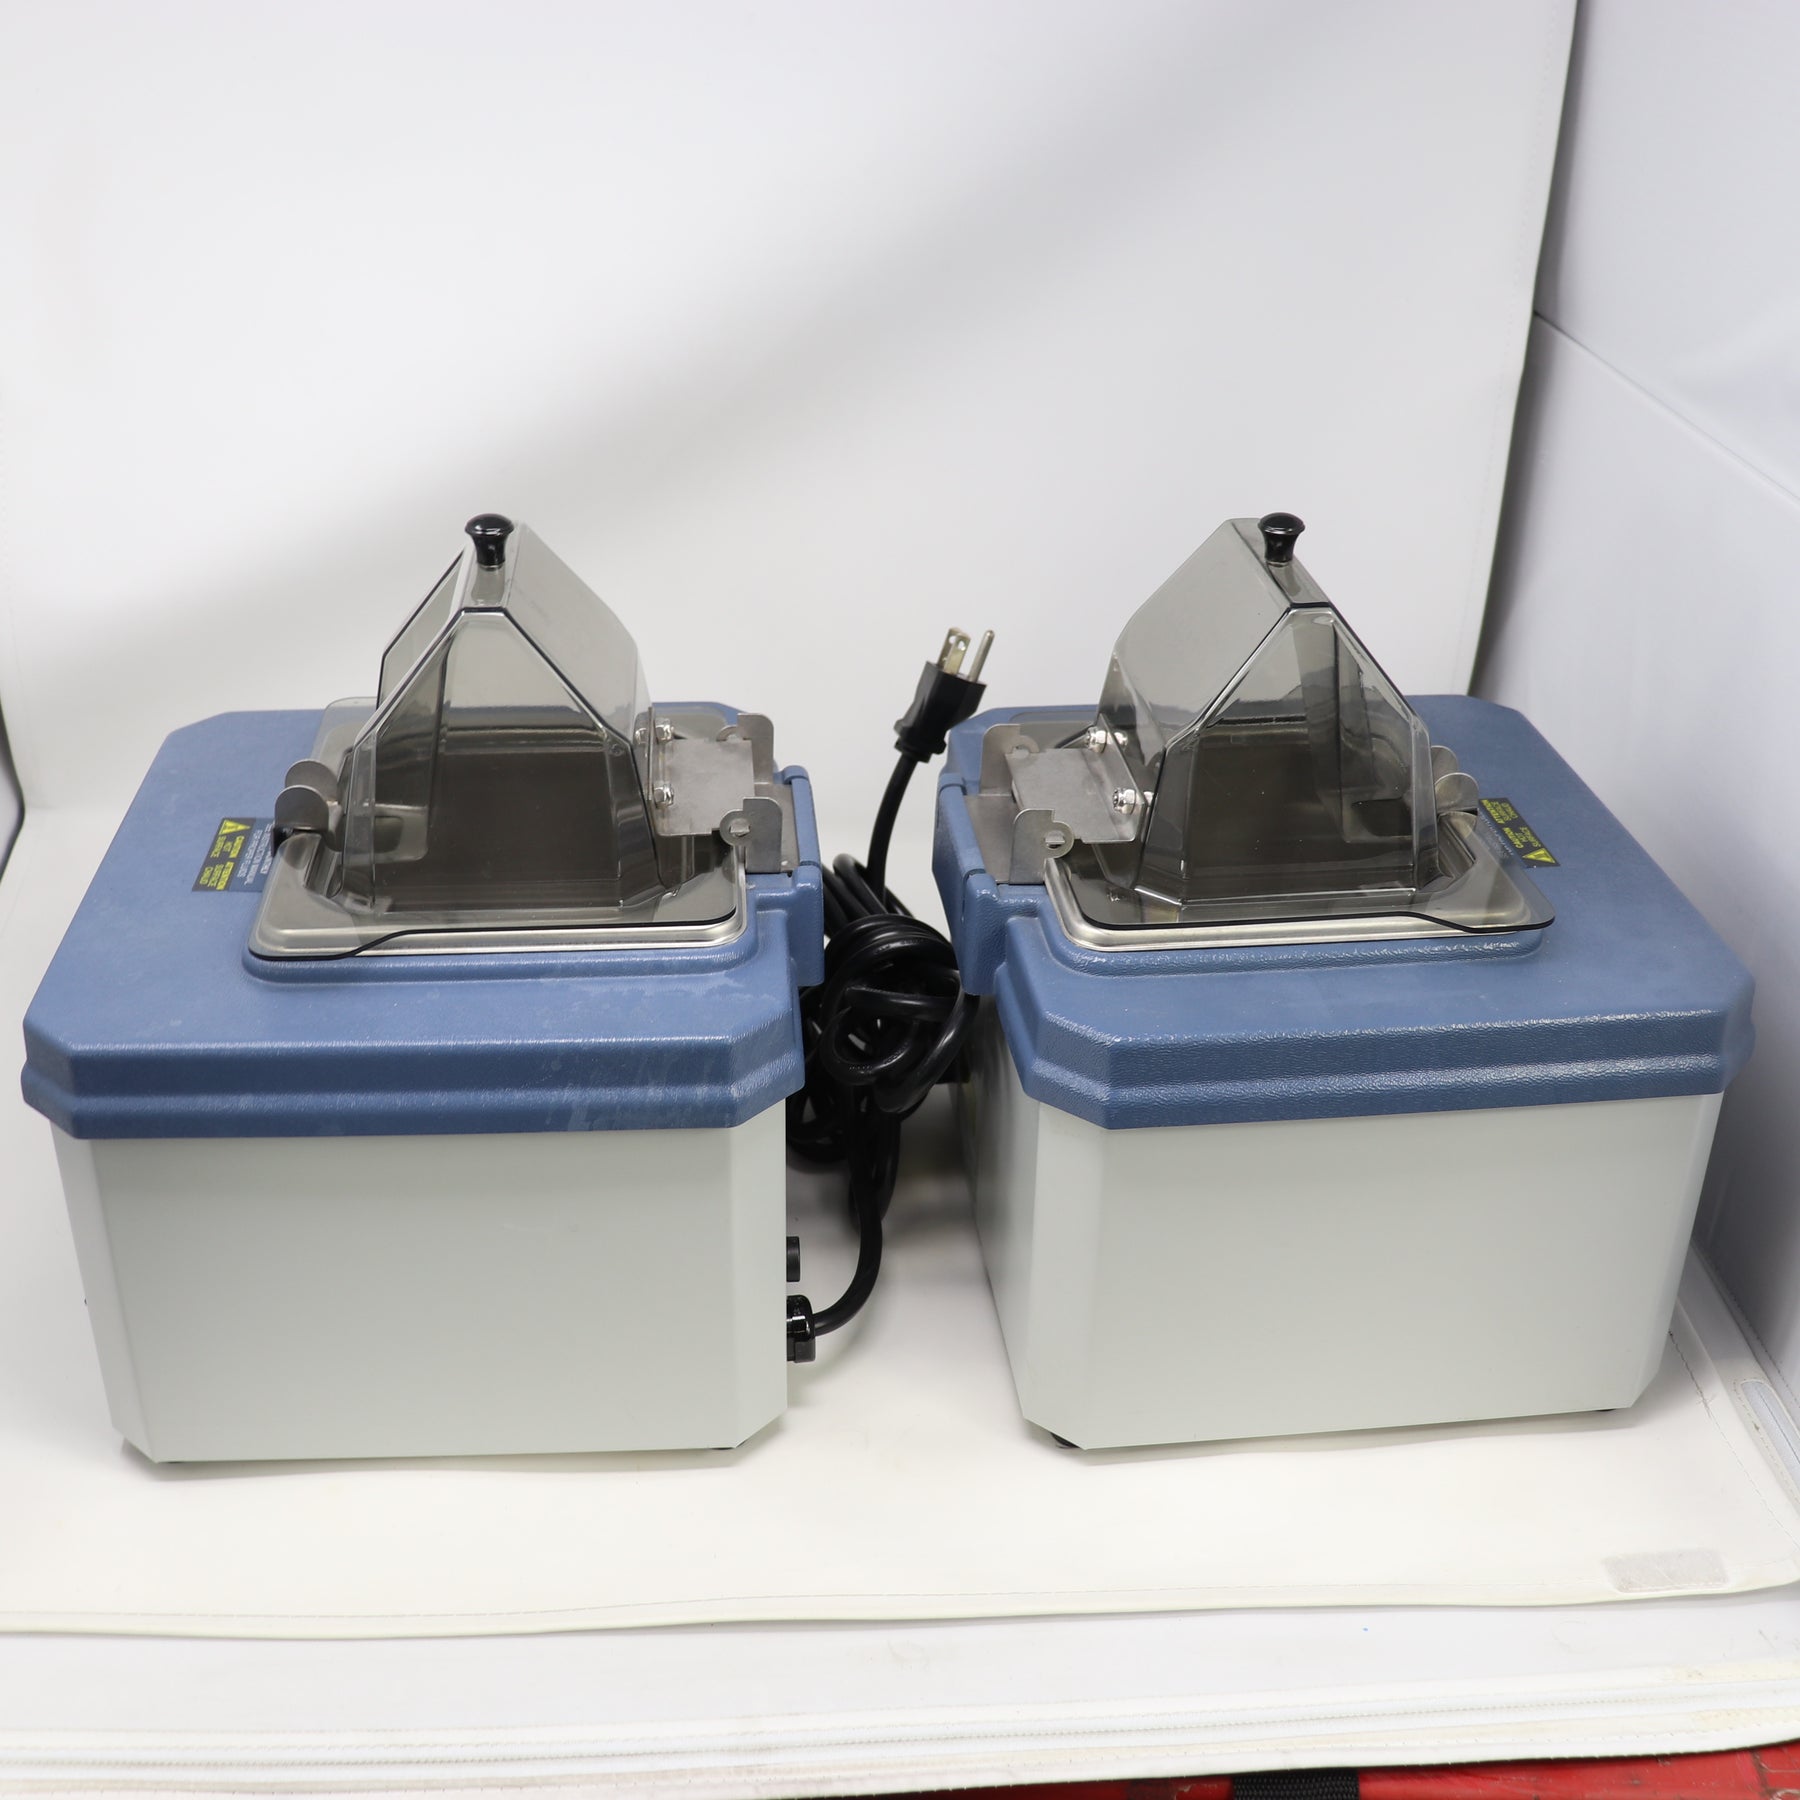 Lot of (2) Fisher Scientific Isotemp 102 Water Baths 15-460-2